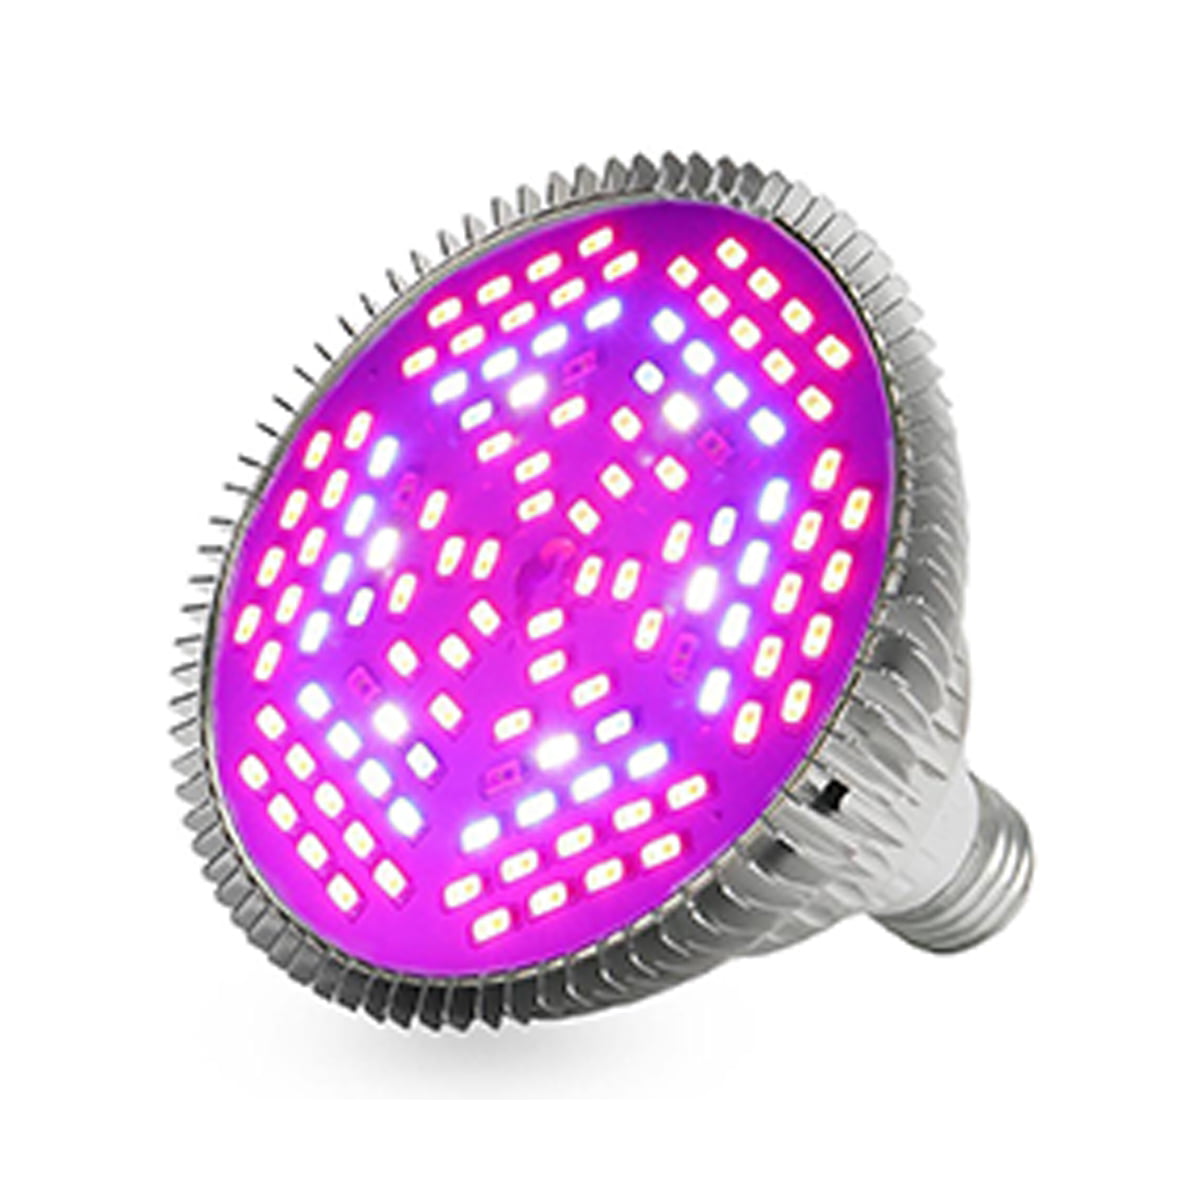 Details about   100W LED Grow Light 150LEDs E27 Growing Lamp for Indoor Veg Hydroponic Plants